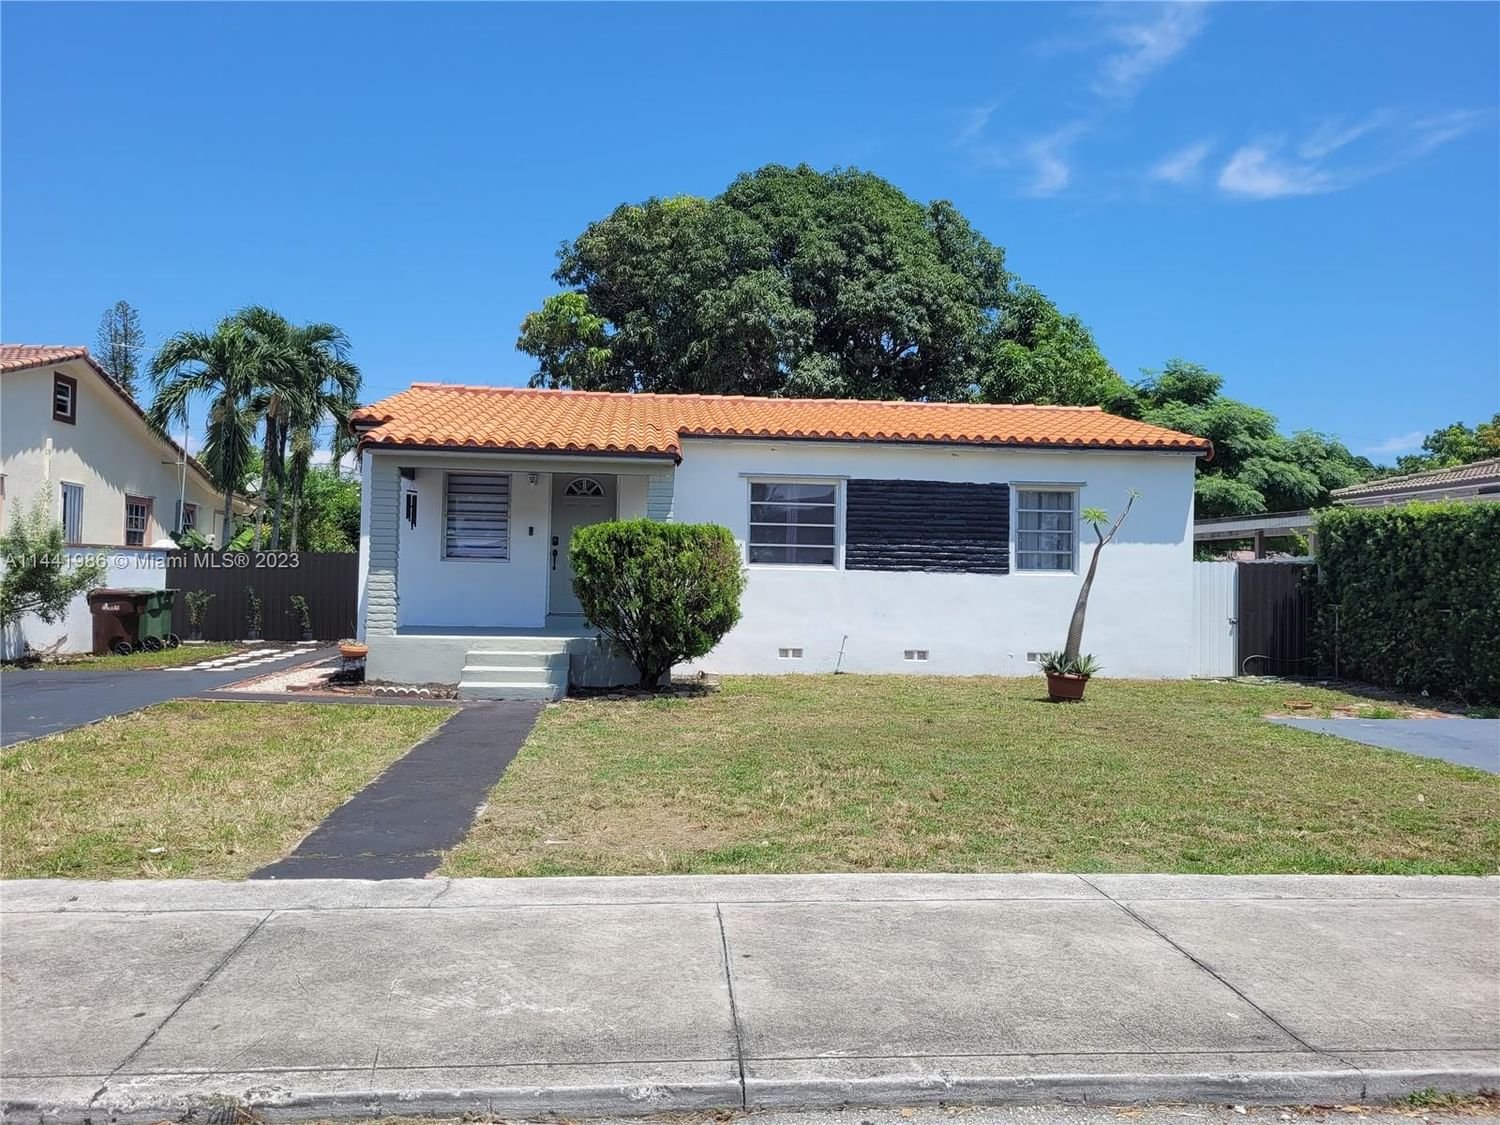 Real estate property located at 171 41st St, Miami-Dade County, Hialeah, FL